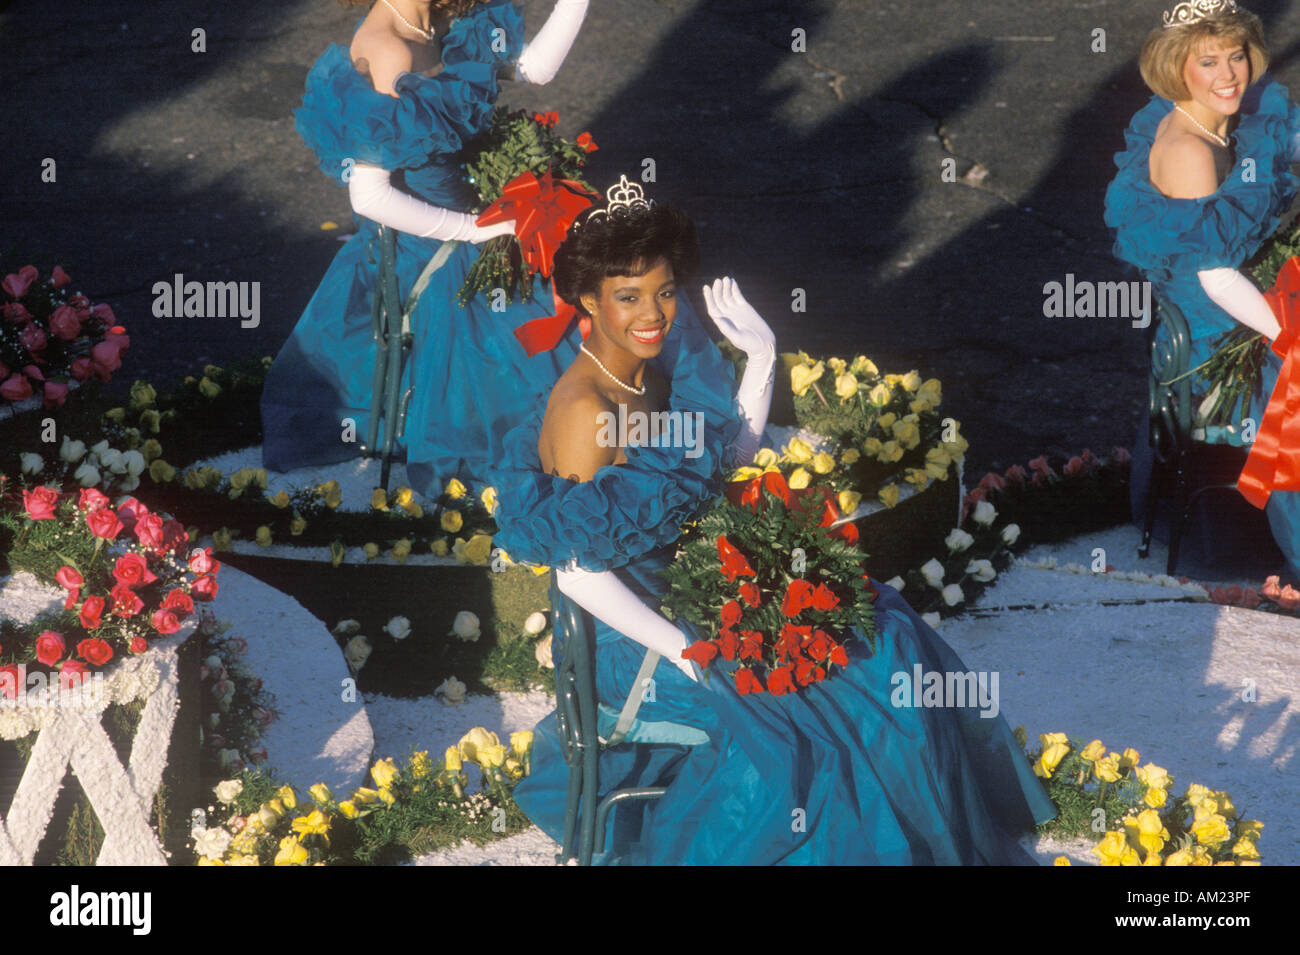 Beauty Queens on Float in Rose Bowl Parade Pasadena California Stock Photo